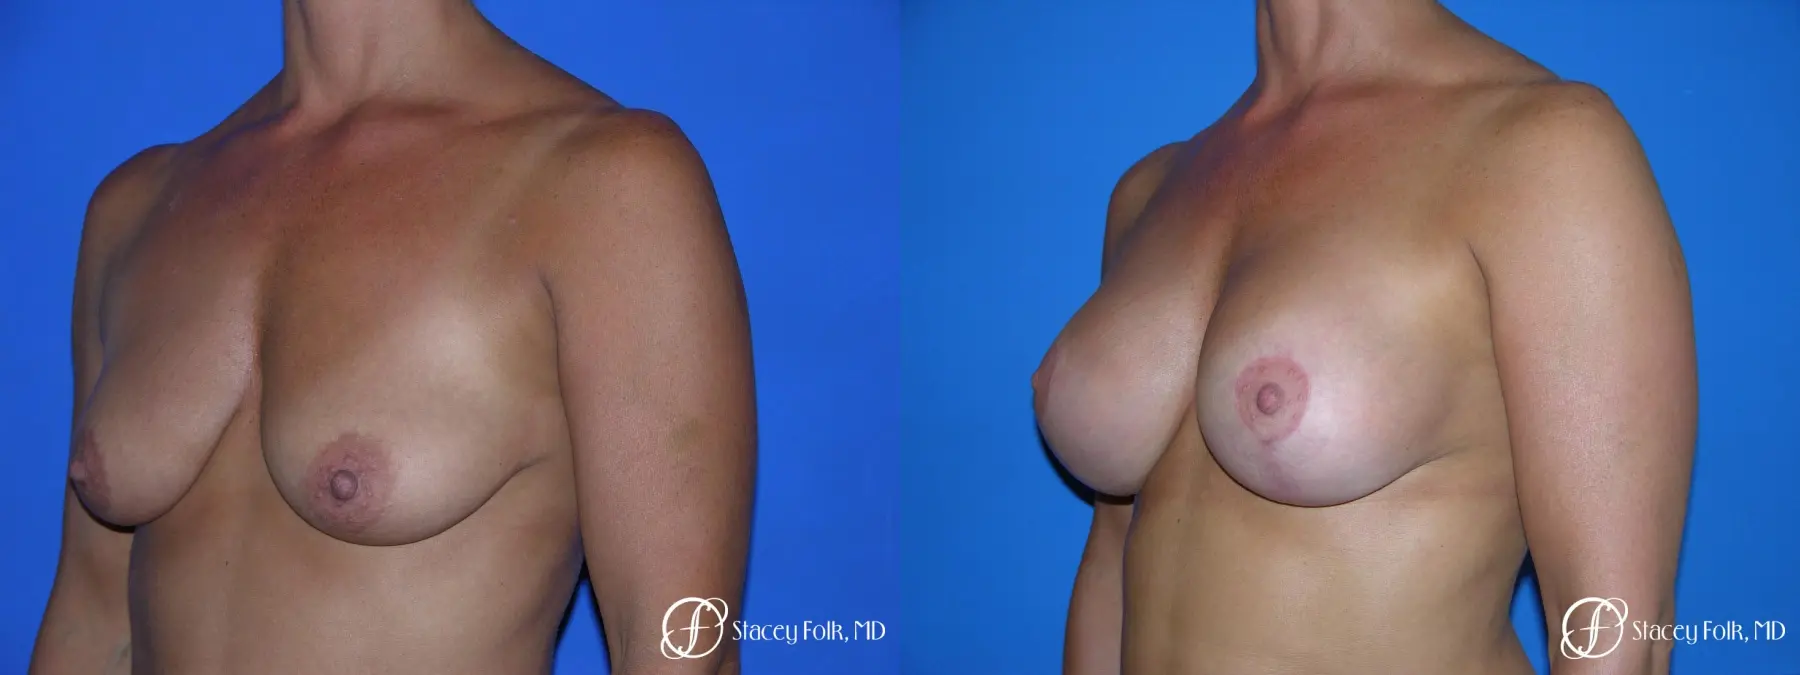 Denver Breast Lift and Augmentation 4556 - Before and After 2